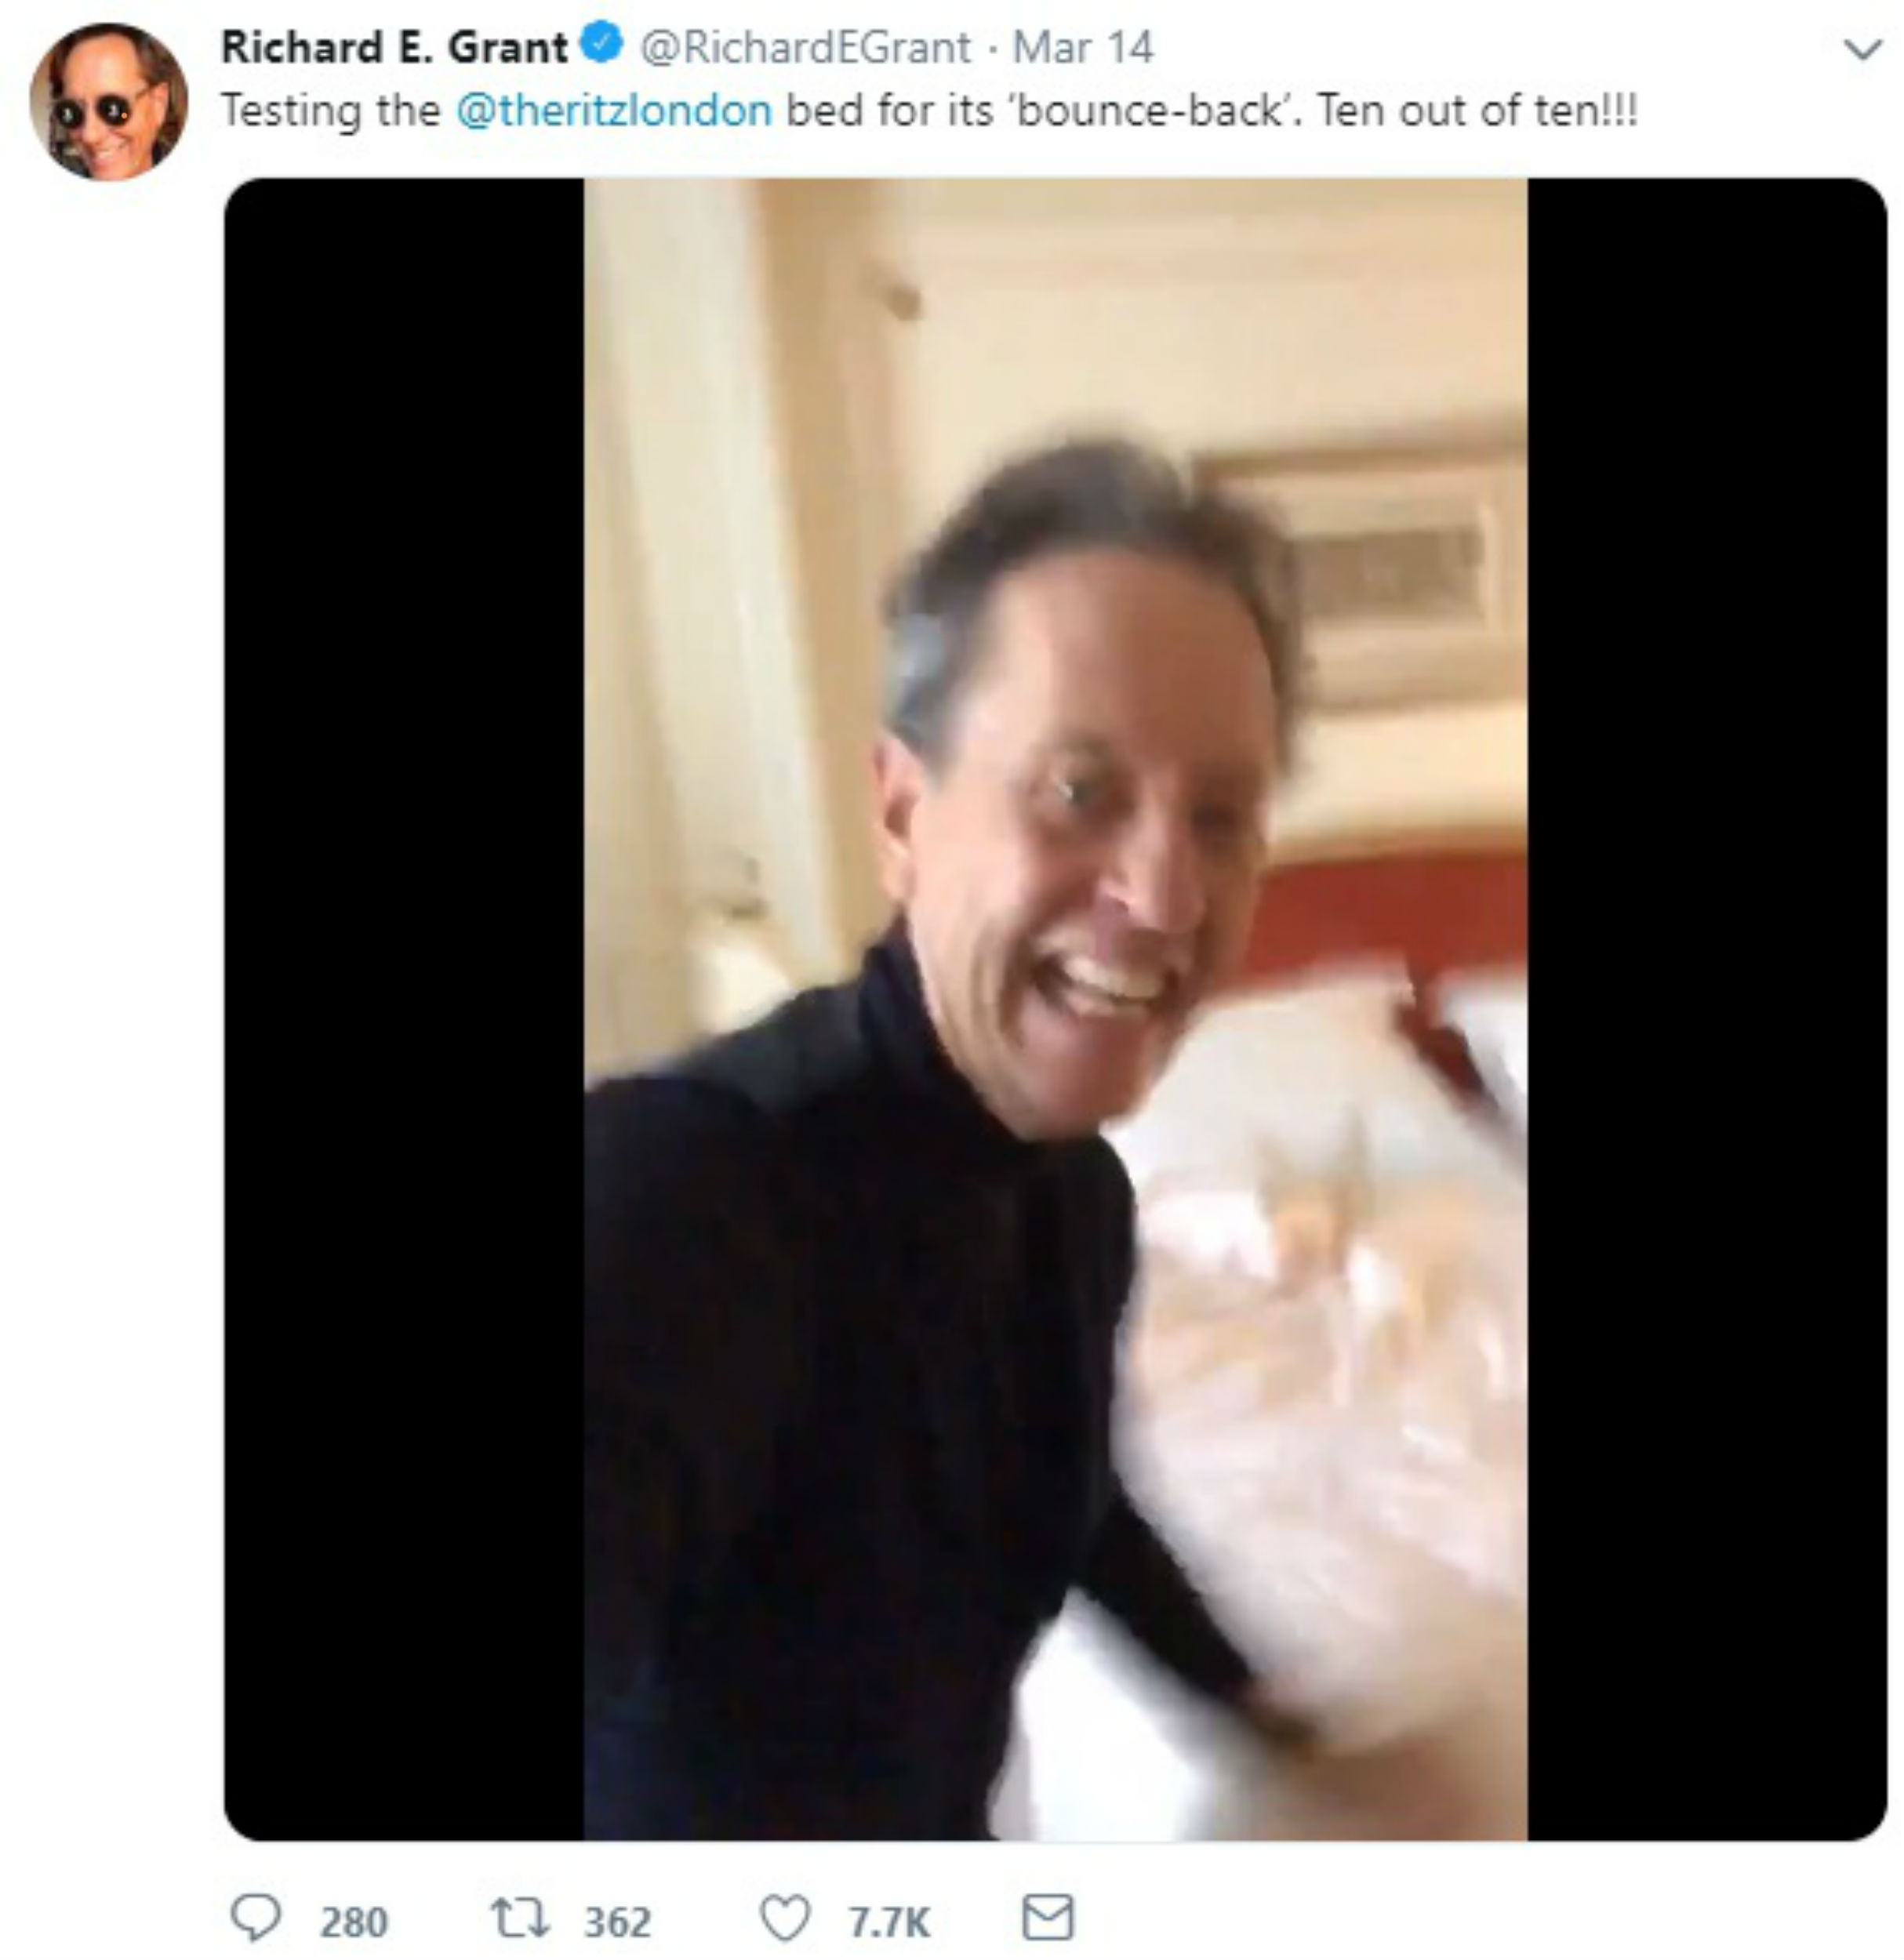 Richard E Grant tweeted about bouncing on a bed at The Ritz which was hilariously recreated by Scottish Comedian, Limmy.